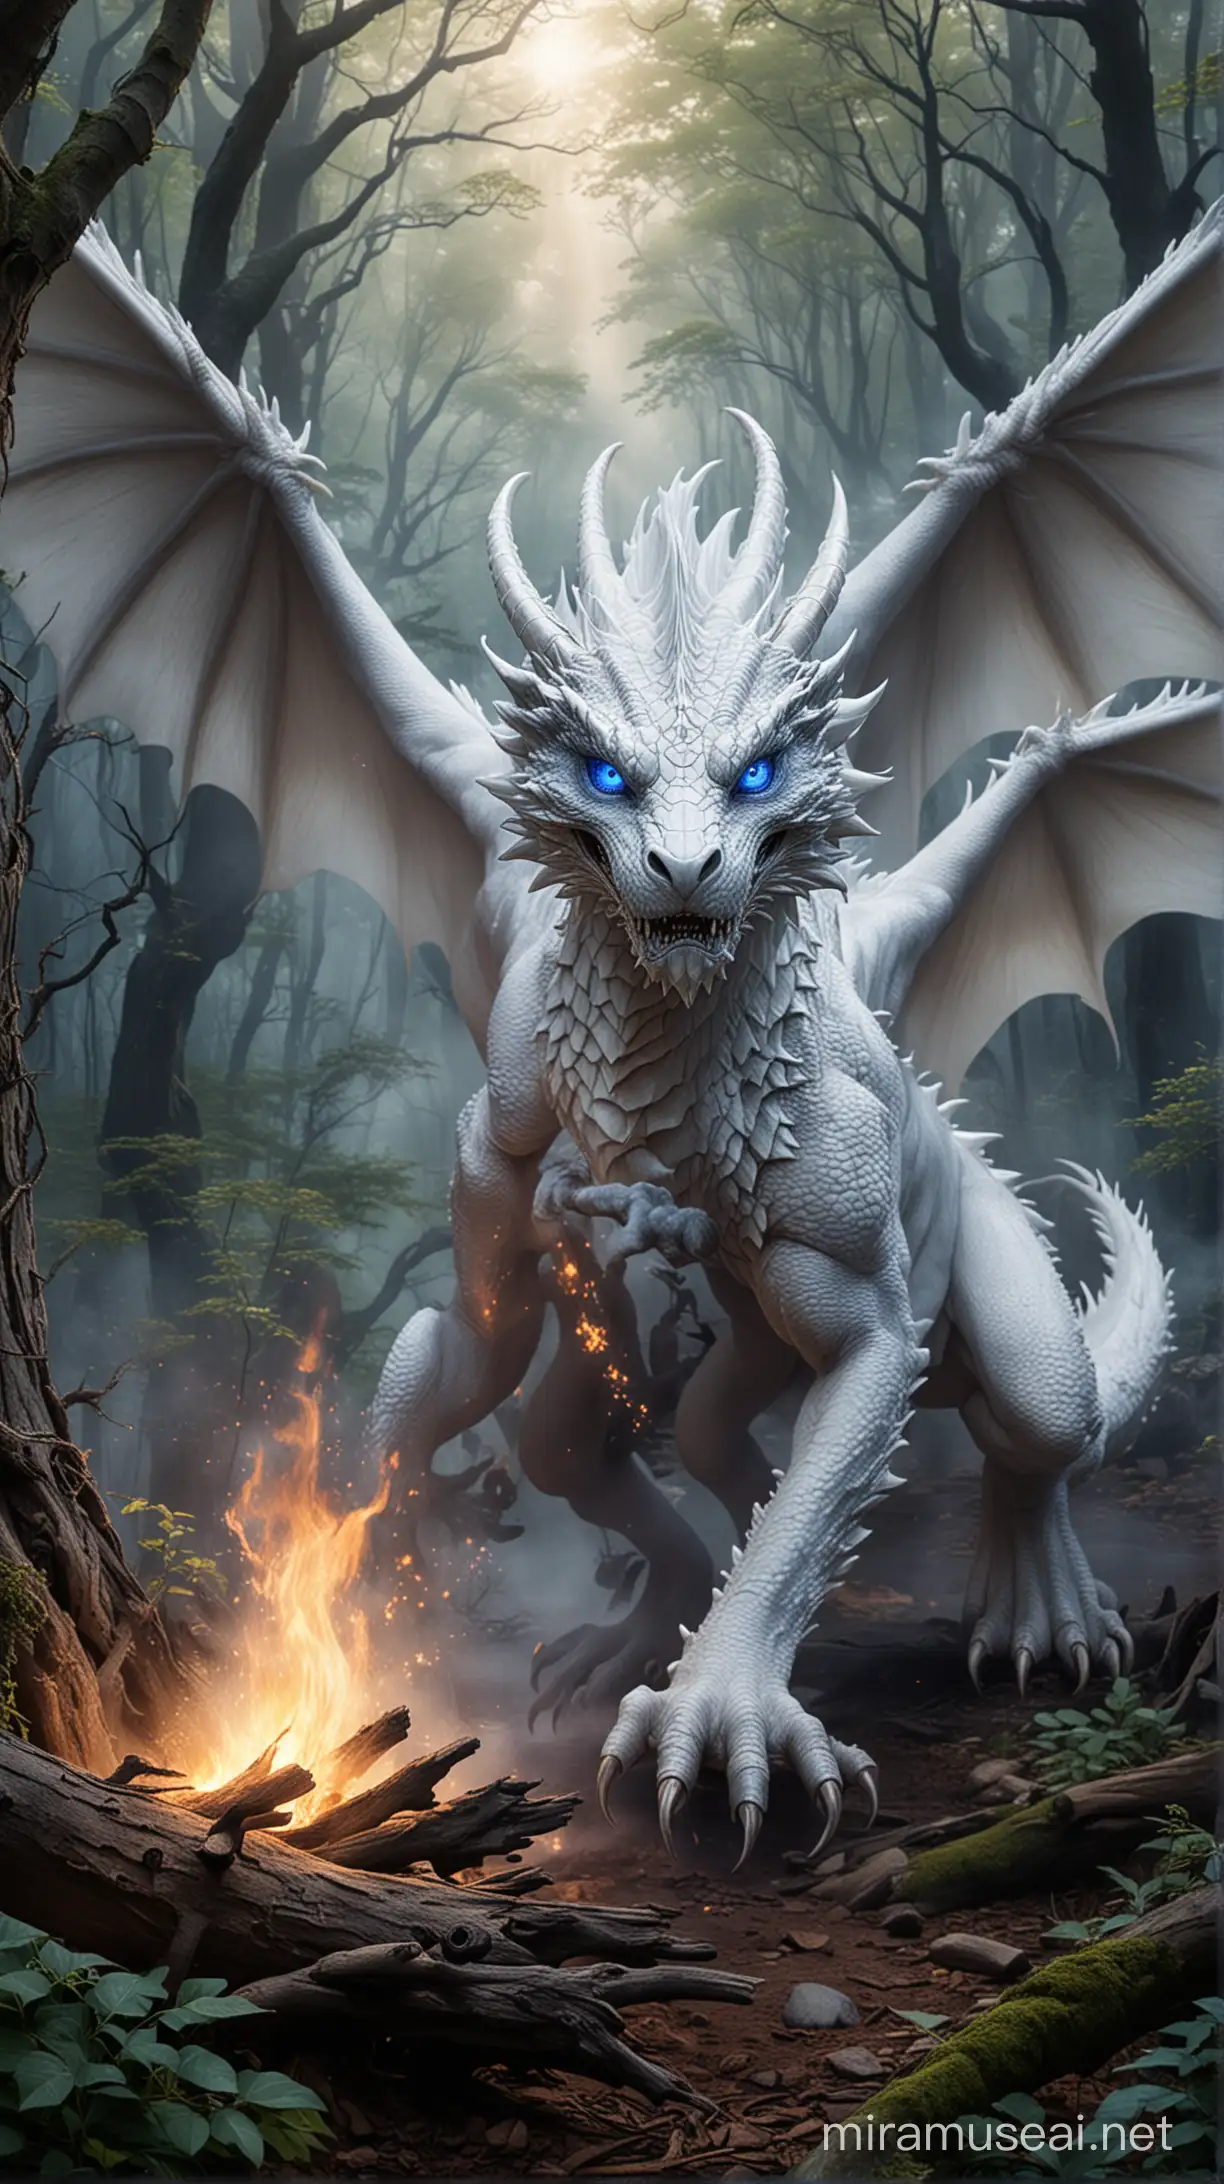 Mystic white dragon with indigo eyes in a enchanted mystical wooded area with fierys flying all around 